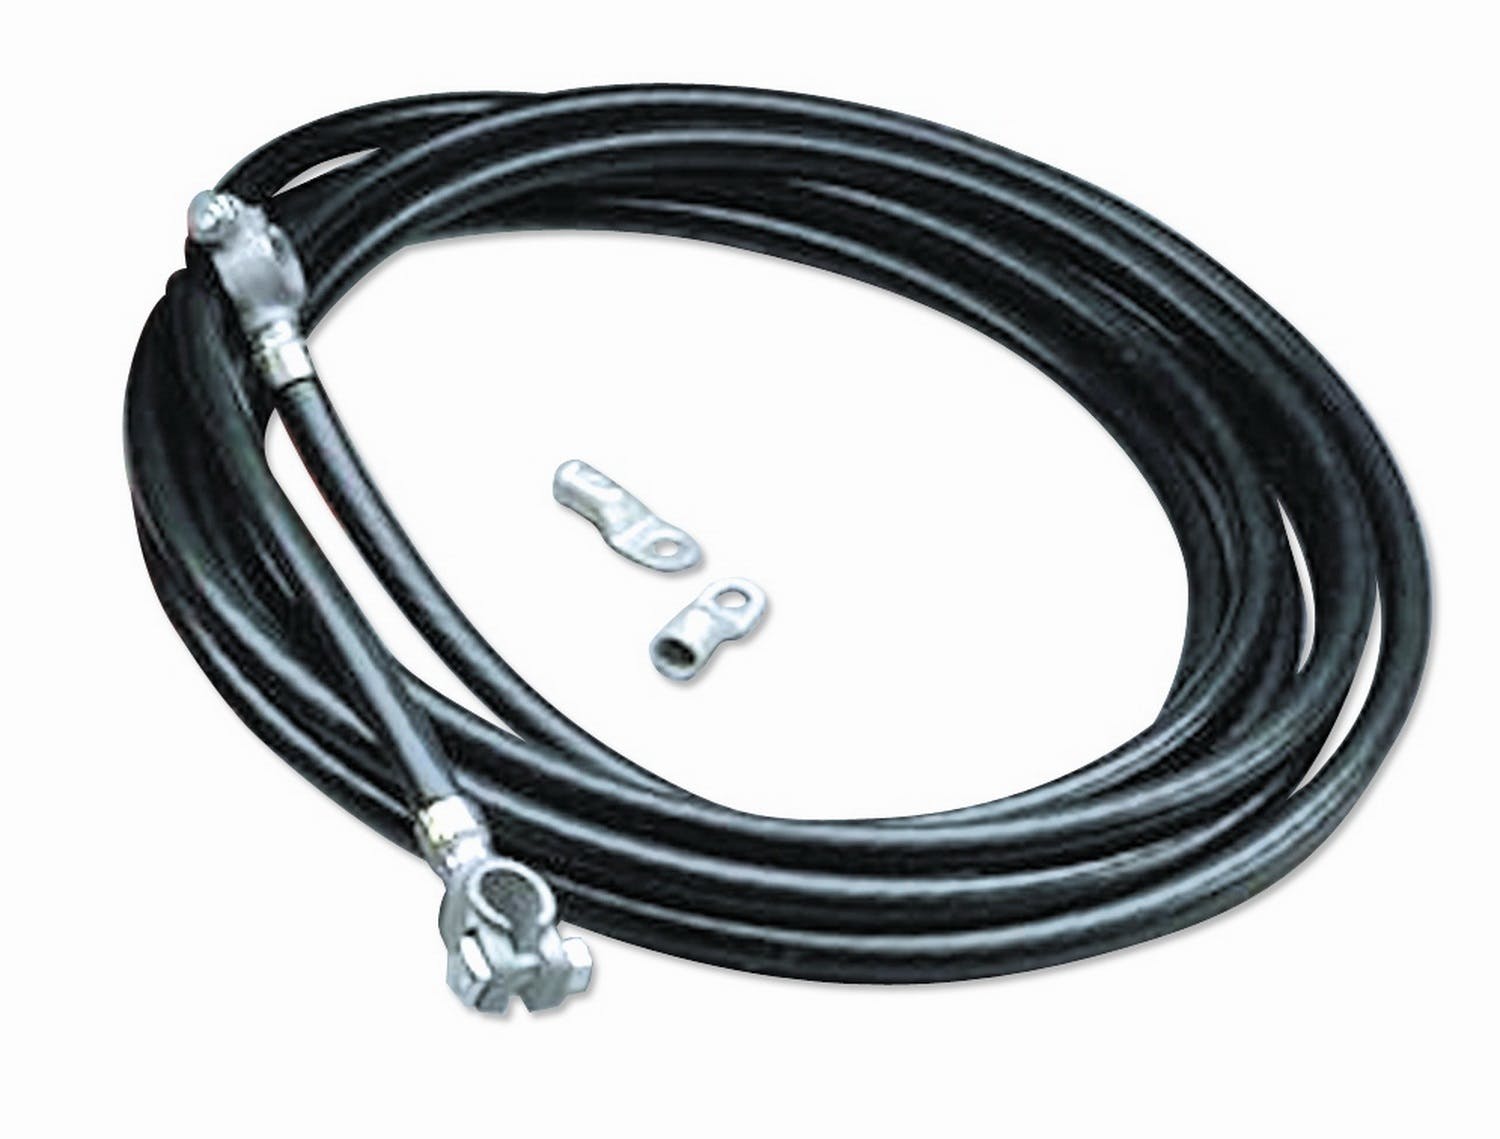 Taylor Cable Products 21542 1/0 ga black 20ft Battery Cable Kit